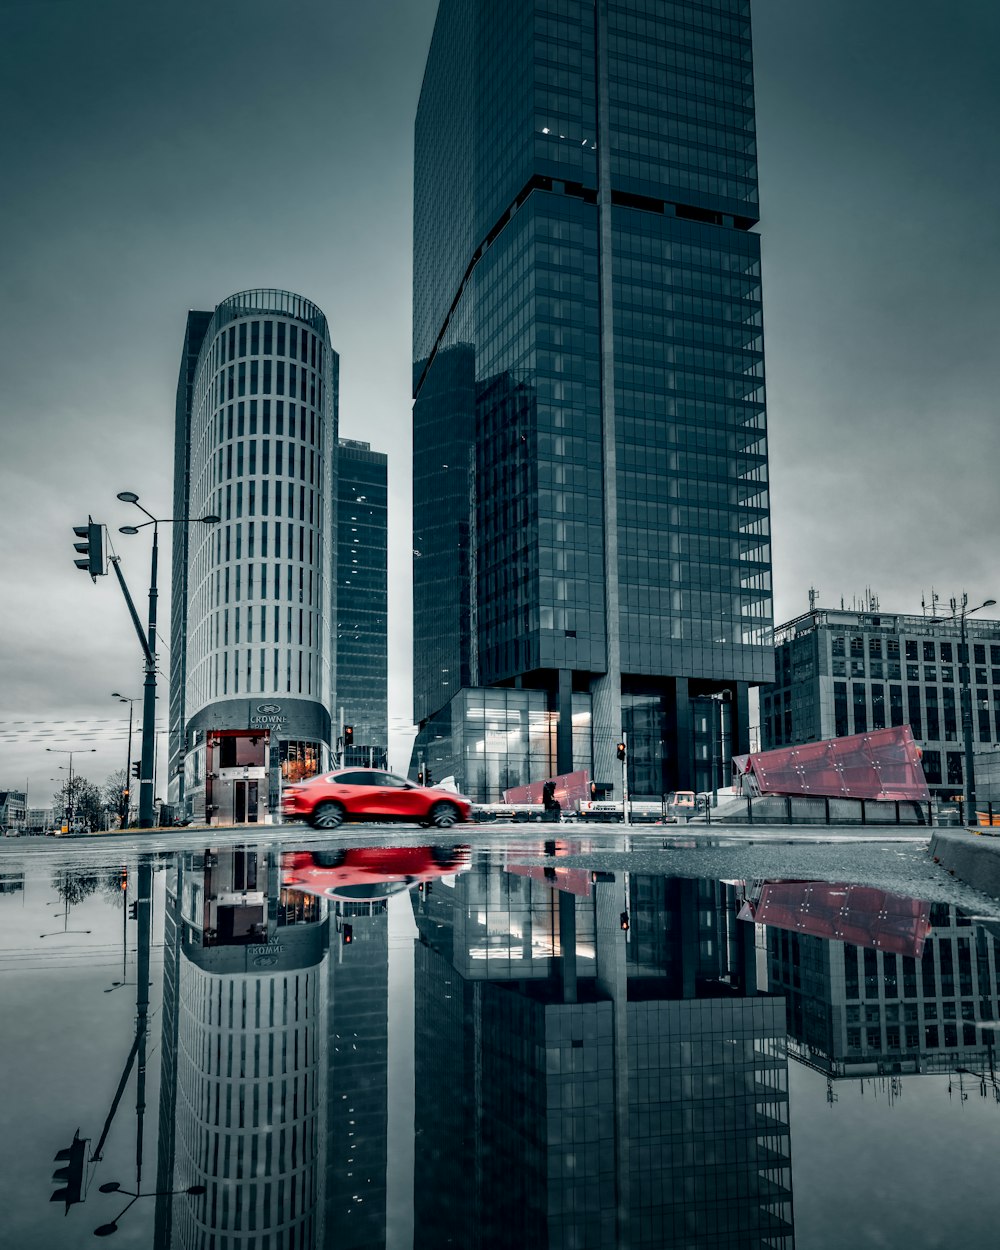 red and white boat on water near high rise buildings during daytime